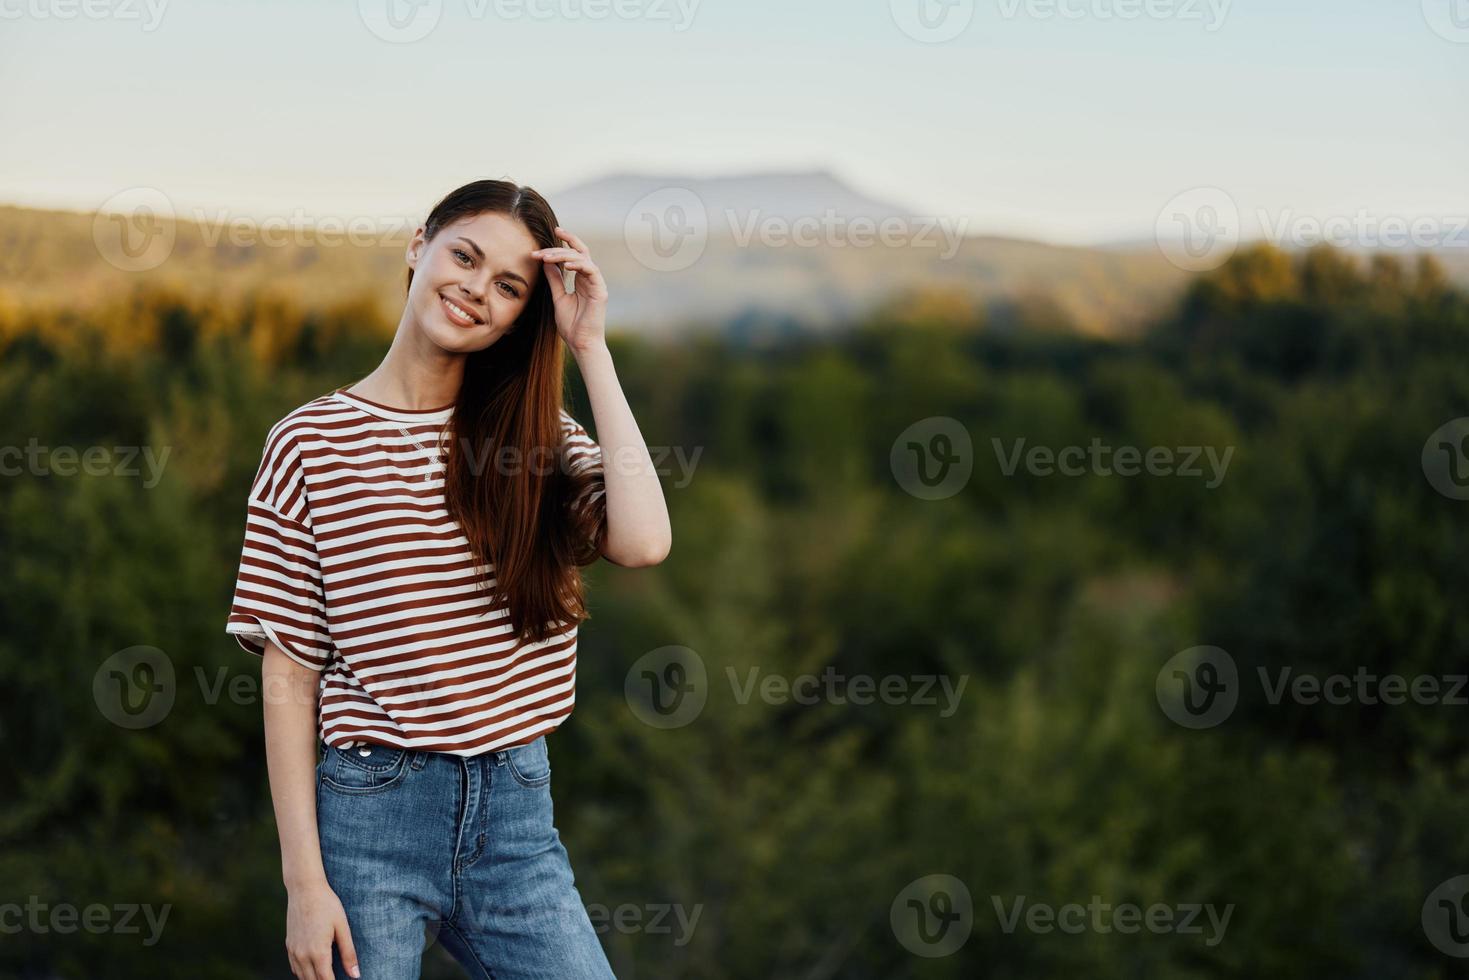 A young woman laughs and looks at the camera in simple clothes against the backdrop of a beautiful landscape of mountains and trees in autumn. Lifestyle on the move photo